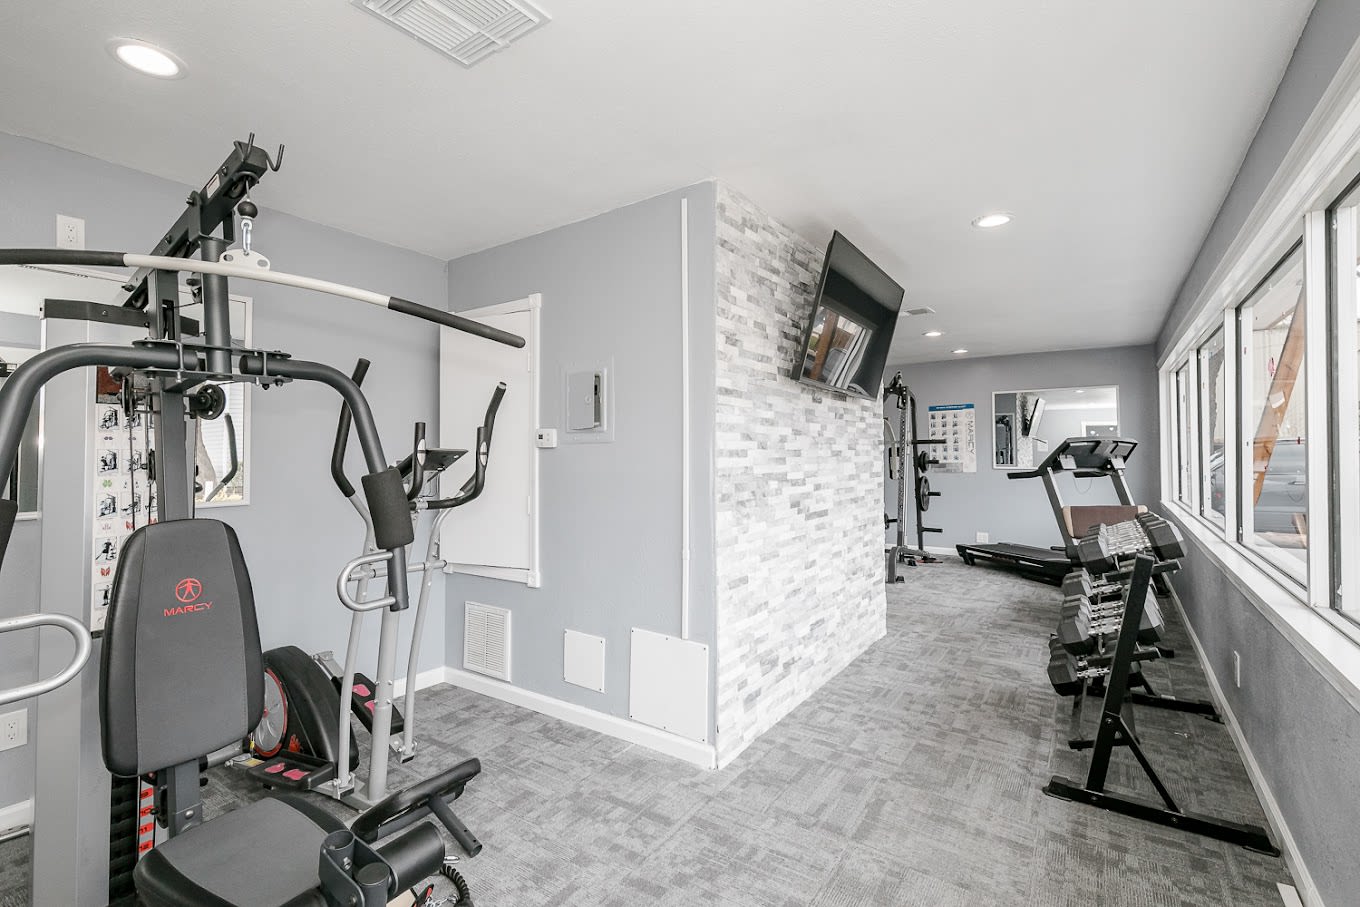 Fitness center machines at Silvermine in Victoria, Texas